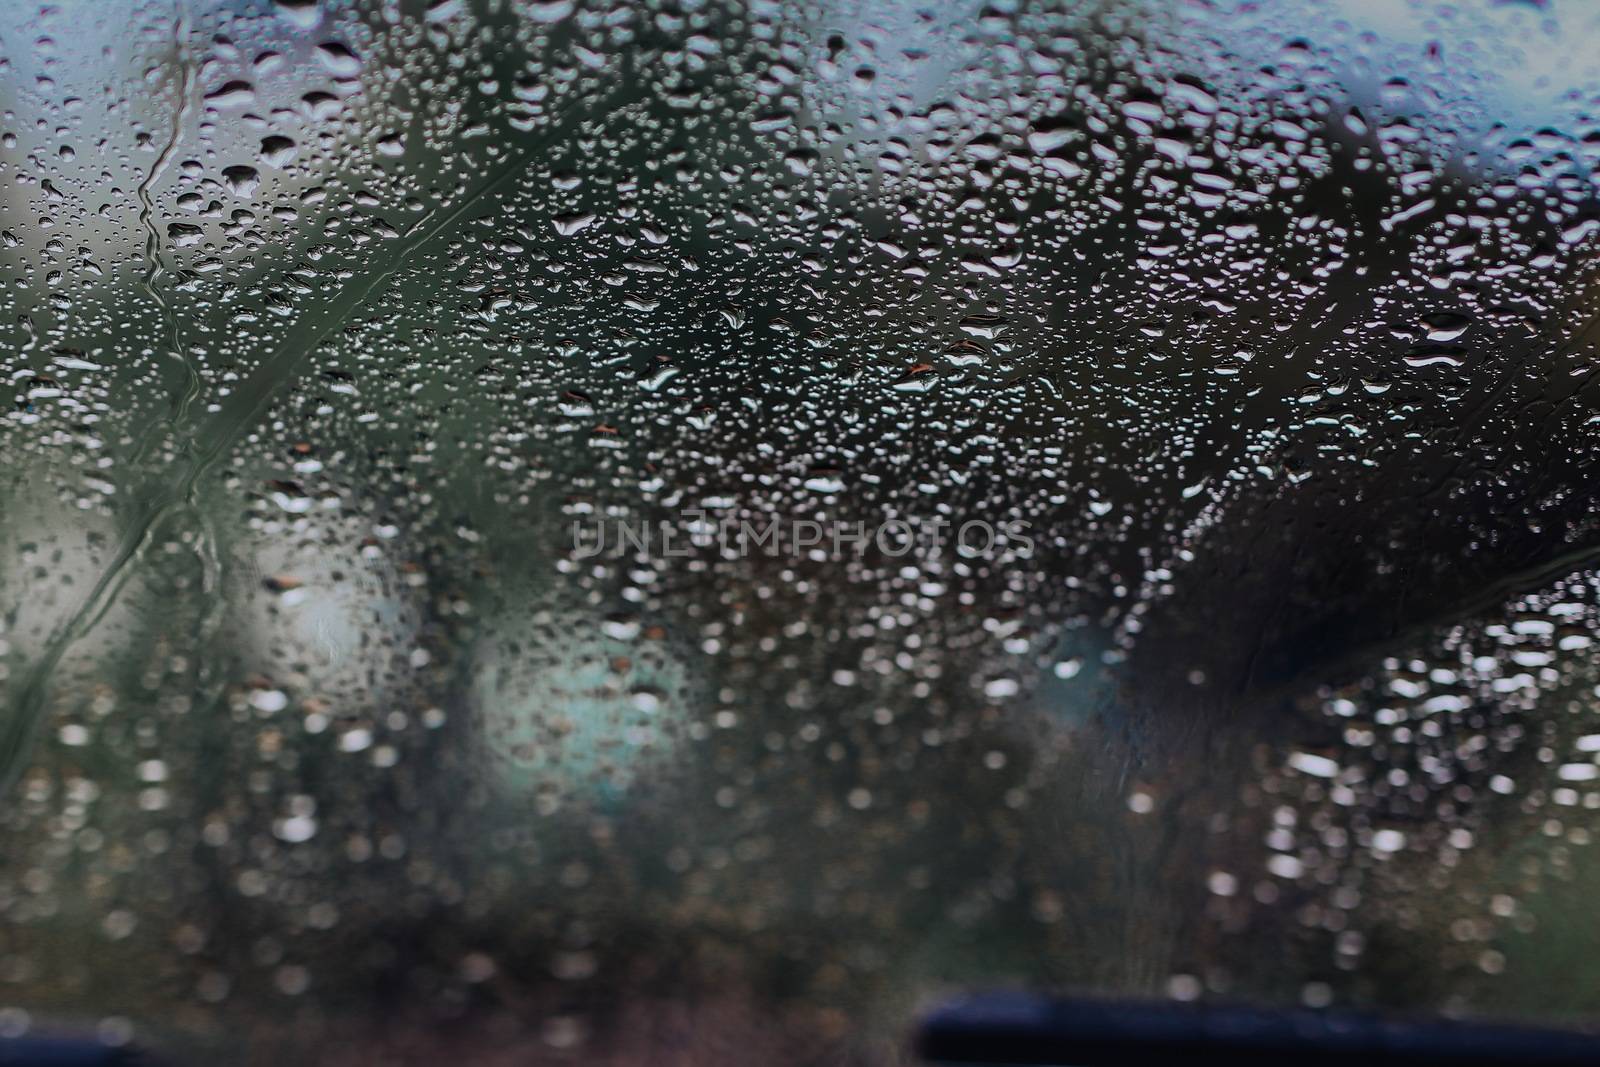 Raindrops on the windshield, blurry scenes by aekgasit